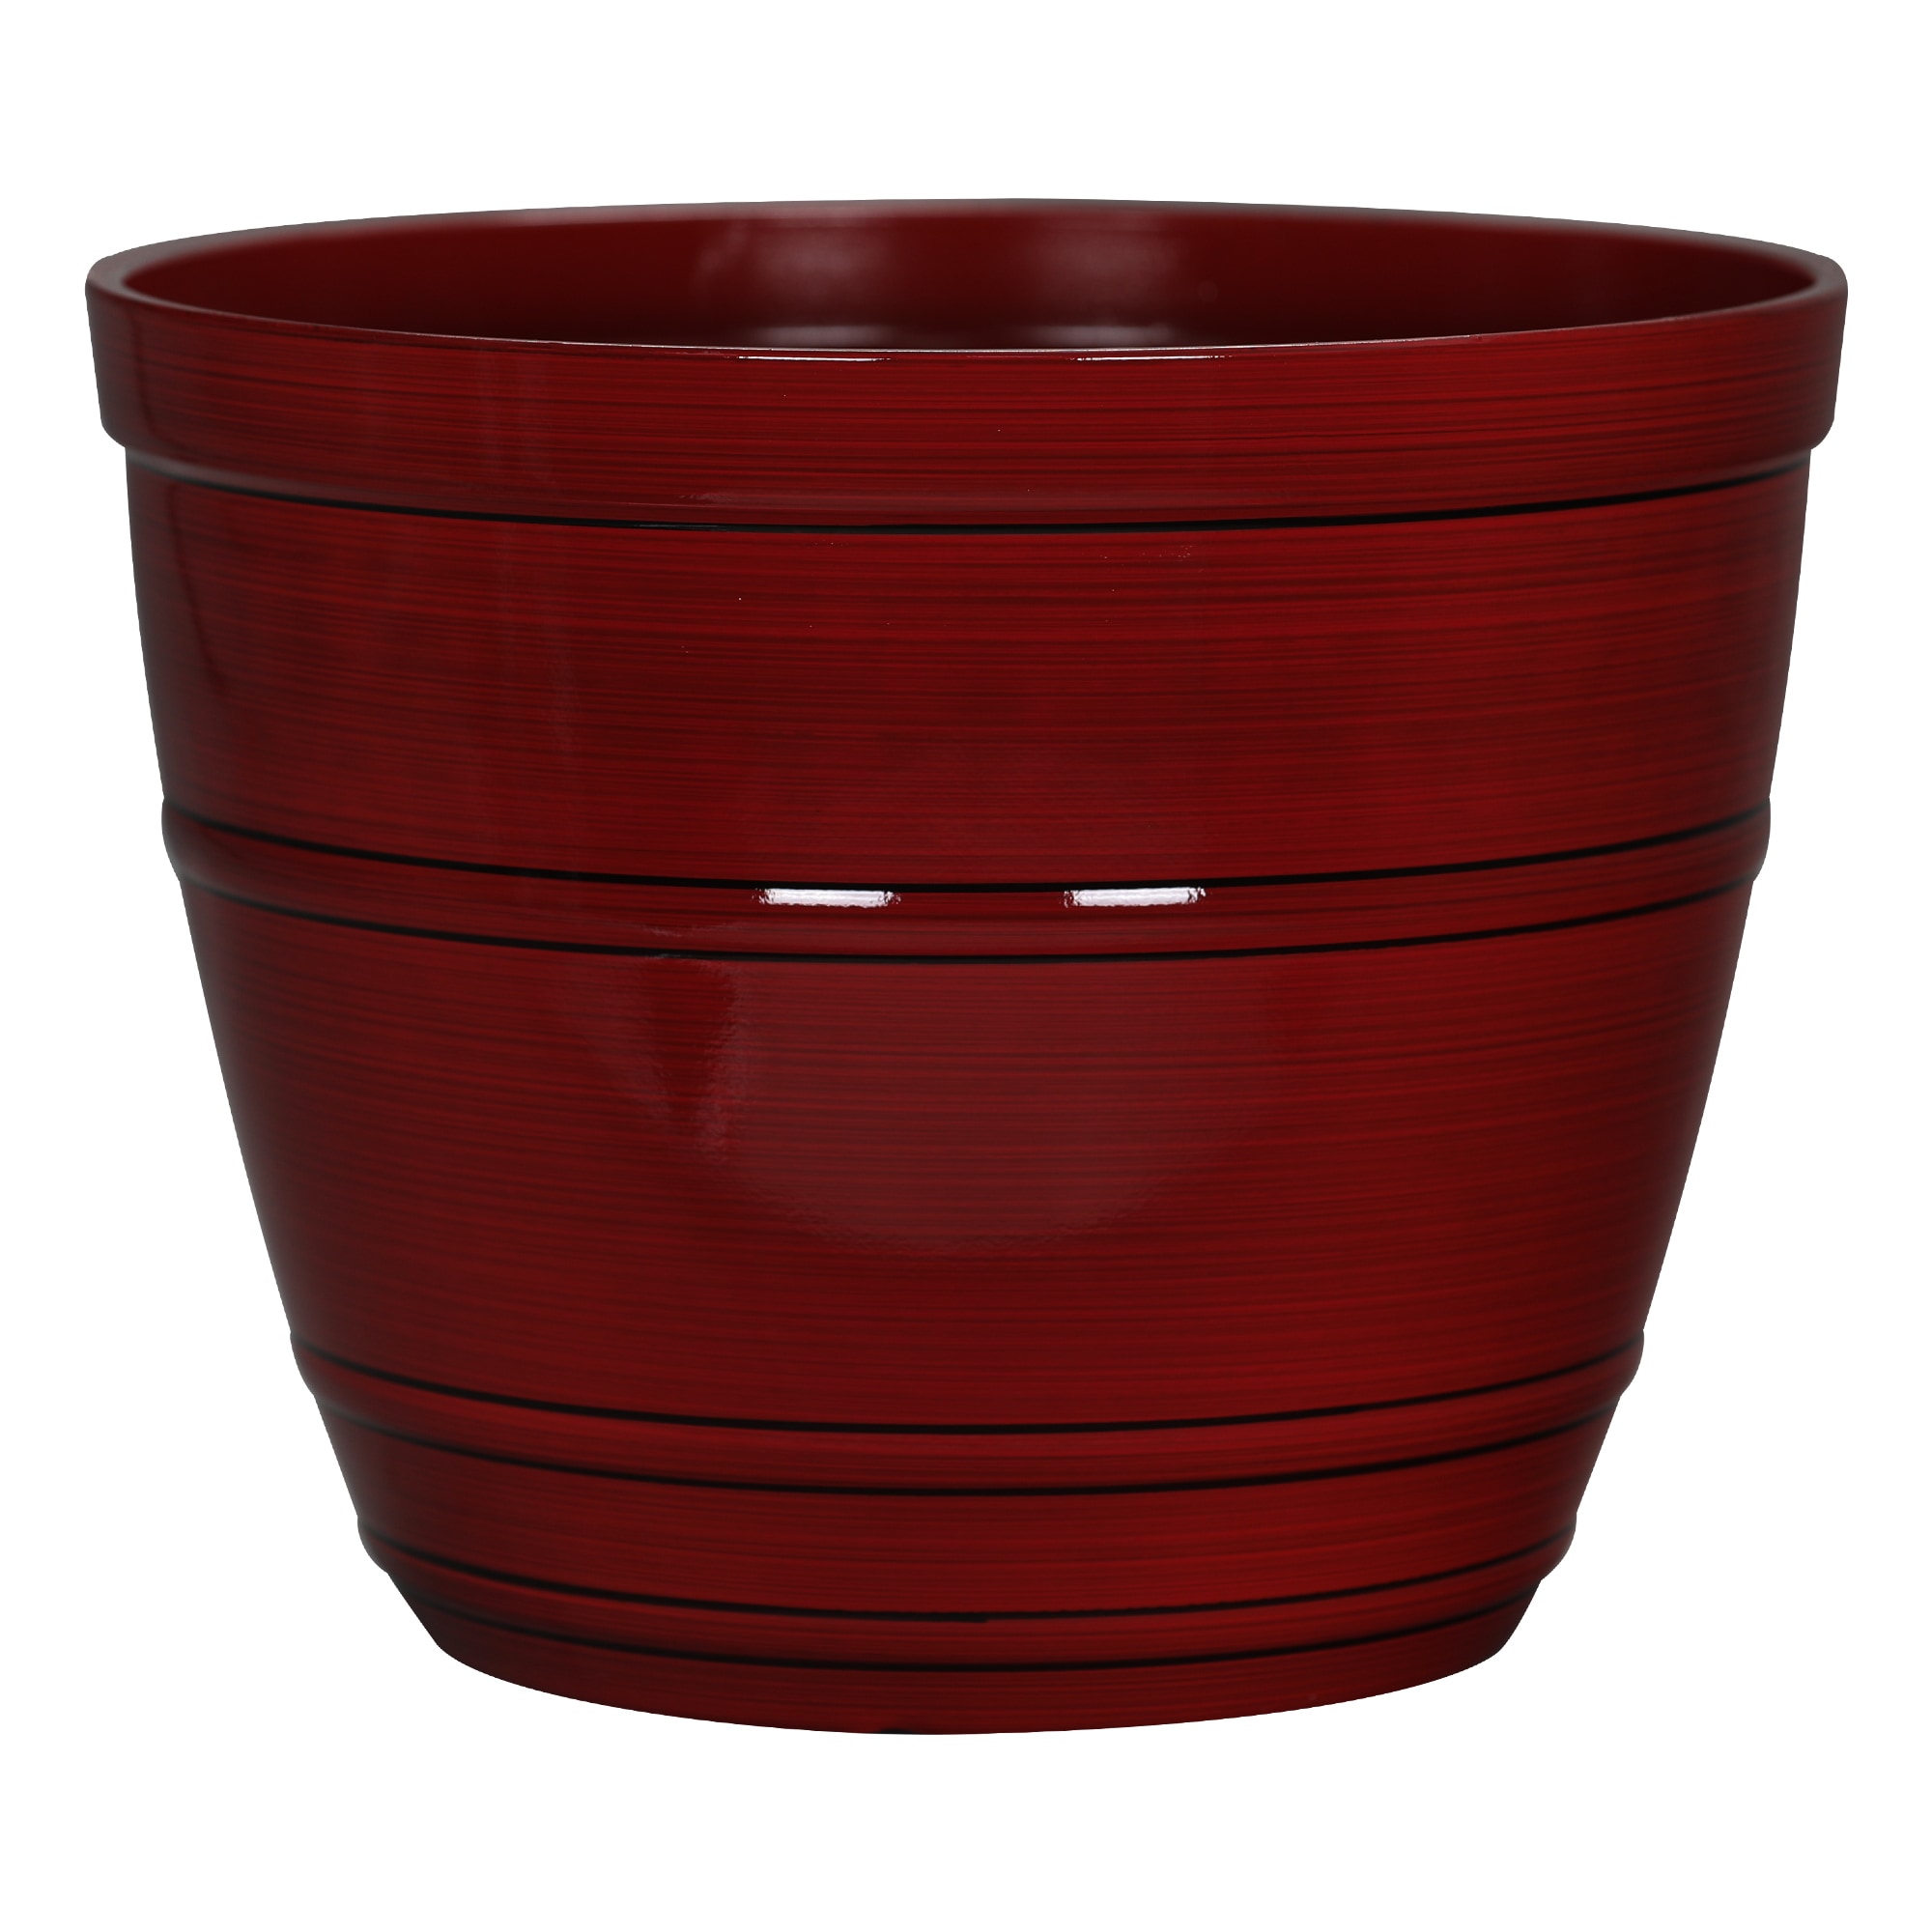 Agfabric 6 in. x 5.3 in. Plant Pots Small Plastic Plants Nursery Pot/Pots Plant Container Seed Starting Pots Red, (100-Pack), Brick Red